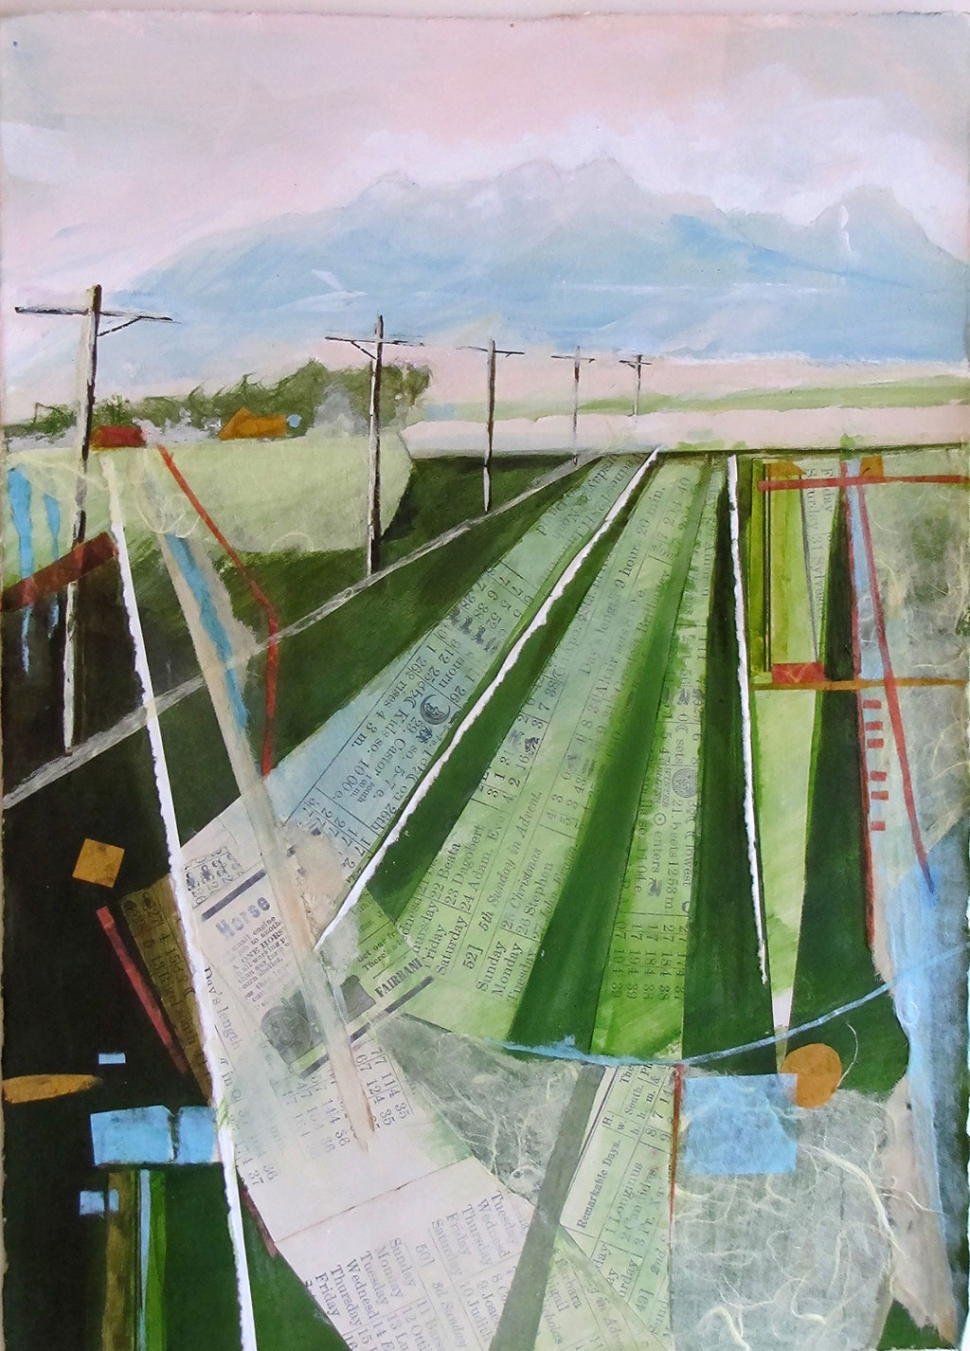 “Annual Harvest” by Dolas Tubbs, acrylic collage on paper, 16” x 20”, Collection of the artist.